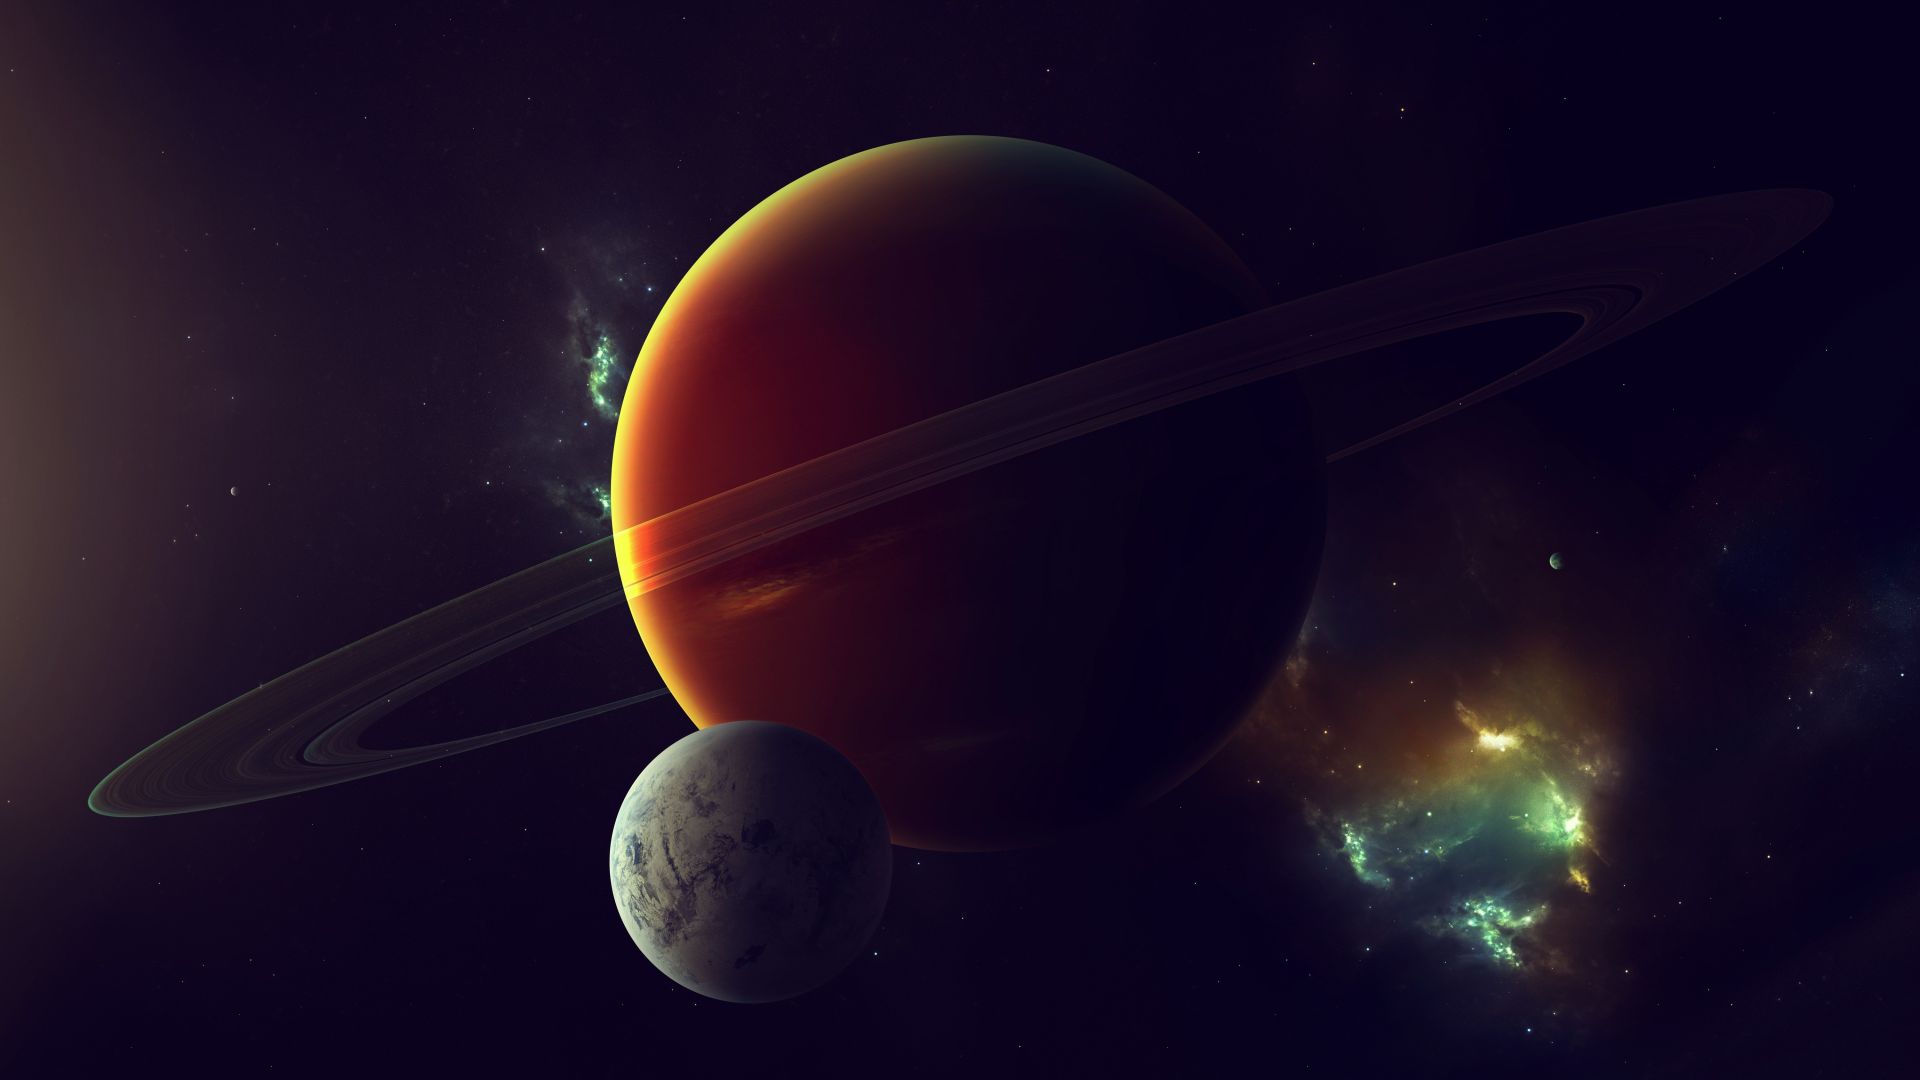 Wallpaper Space planet with orbit